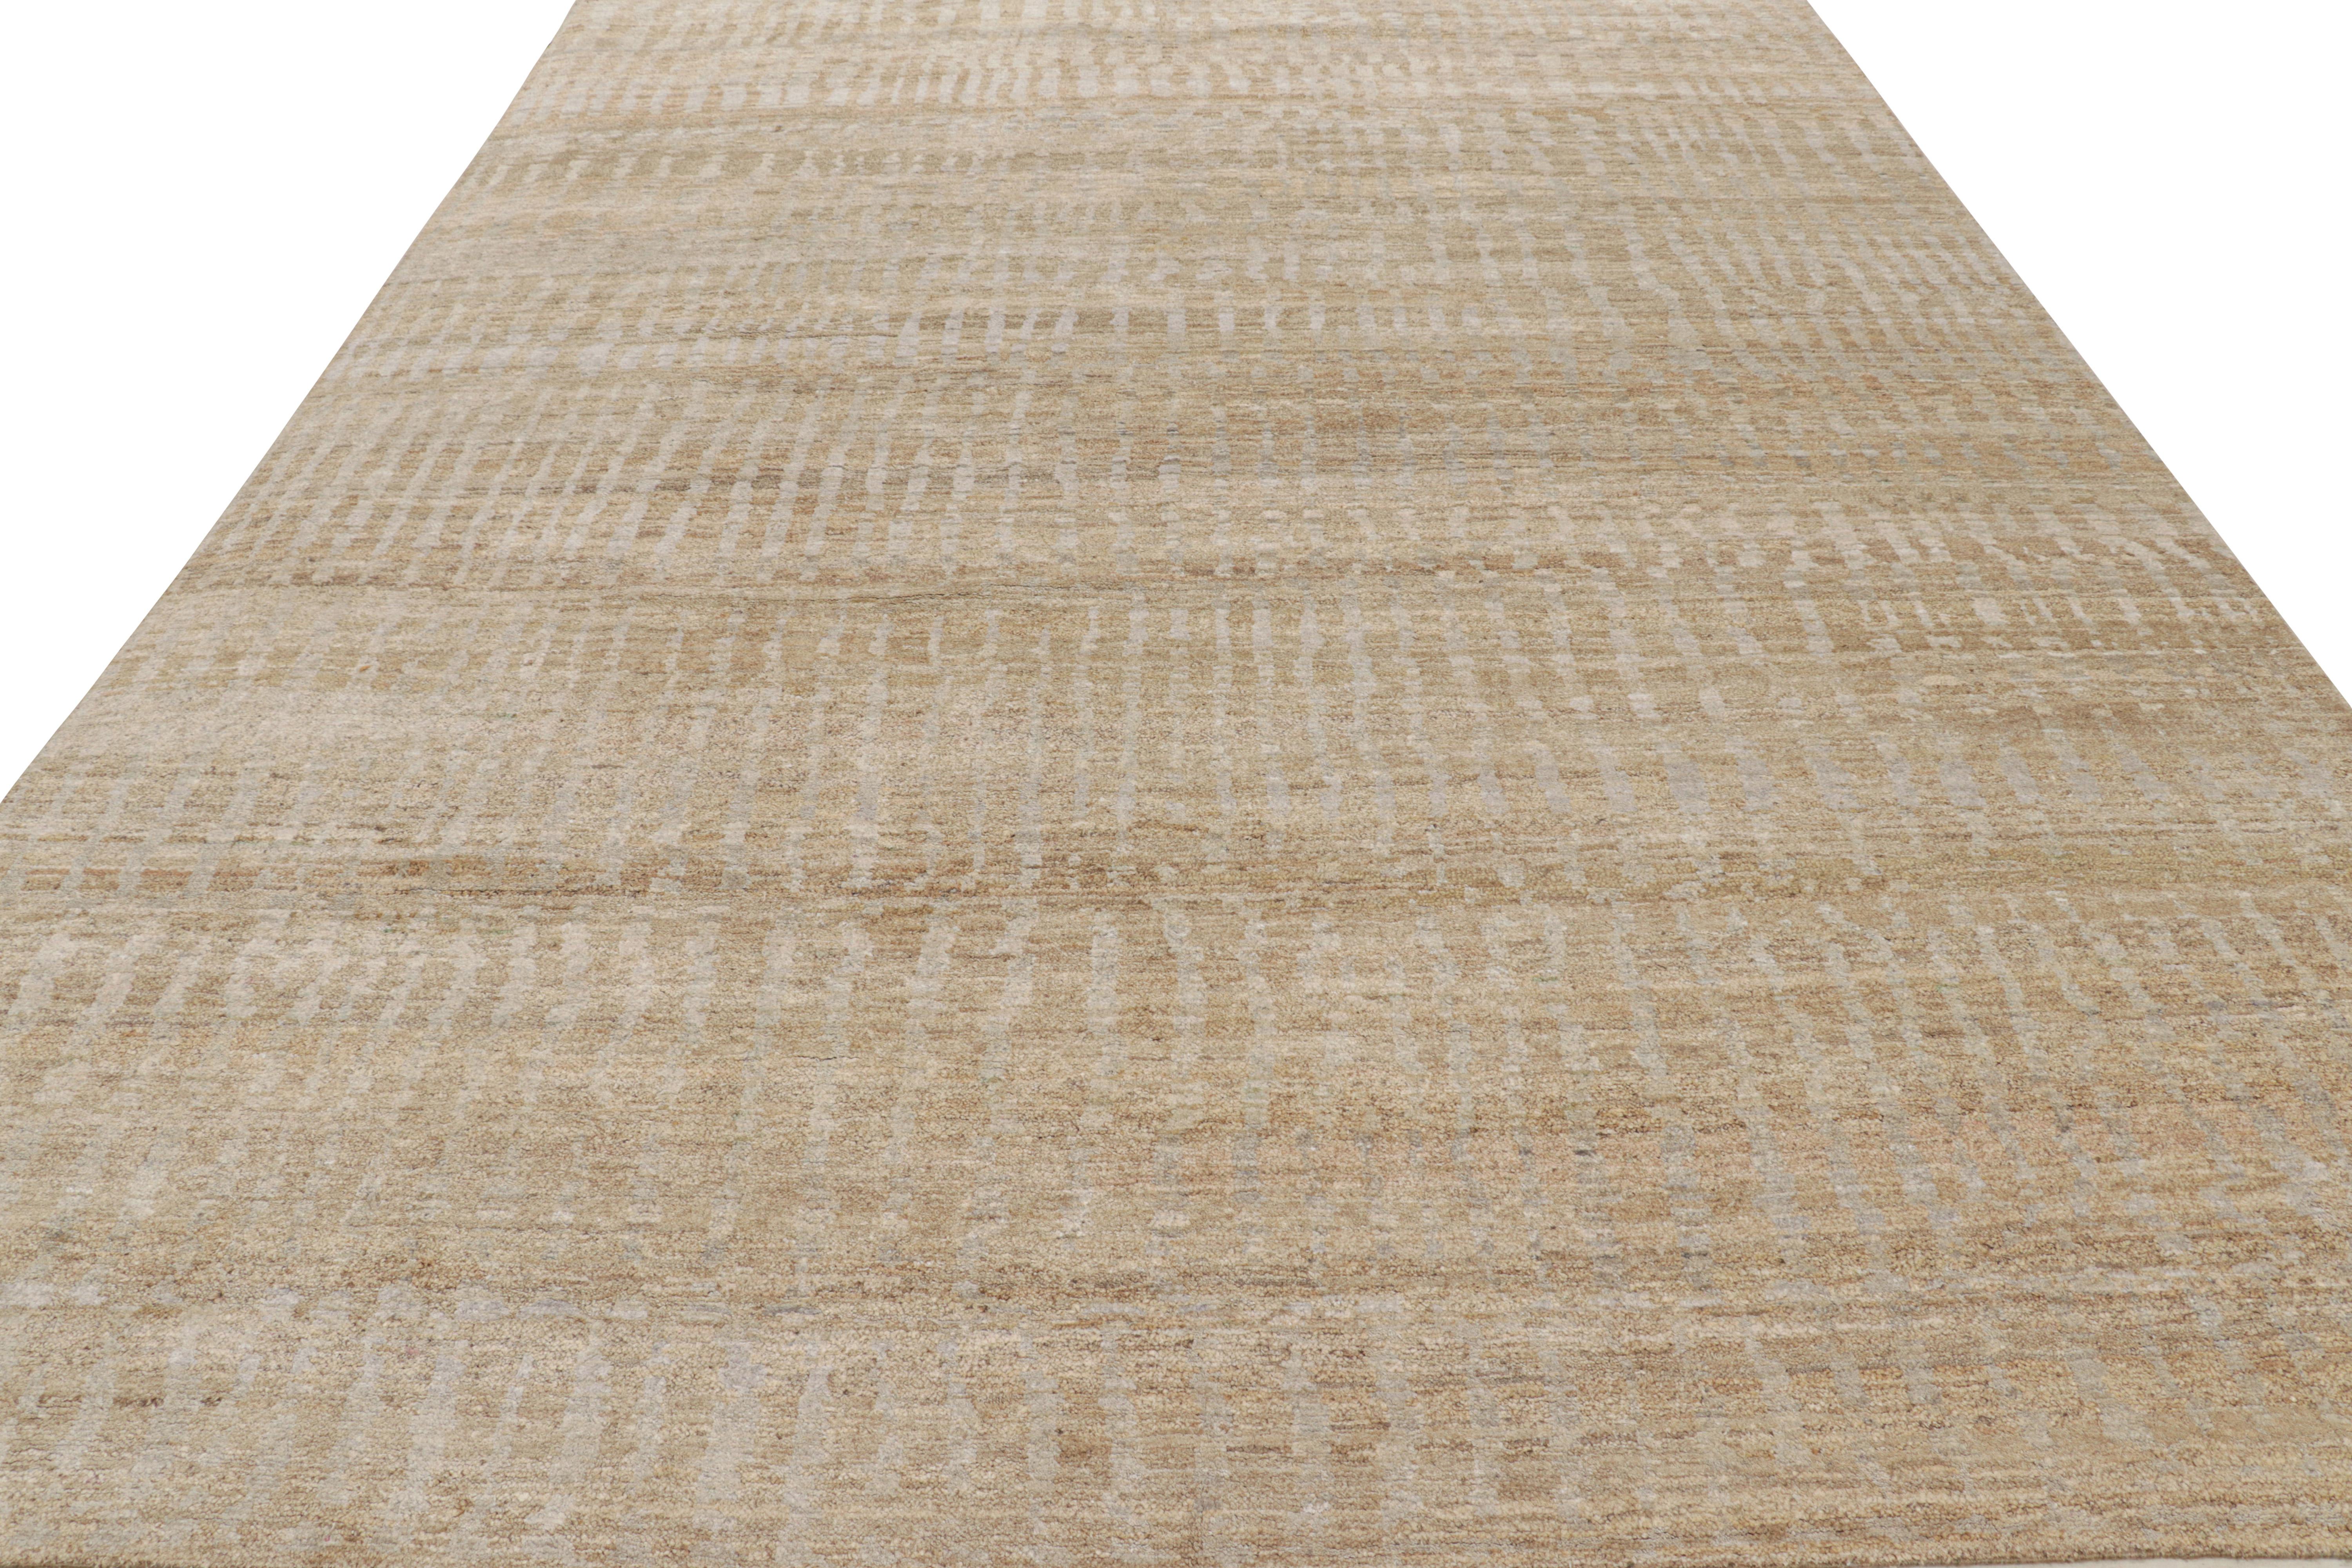 Hand-Knotted Rug & Kilim’s Contemporary Textural Rug in Beige-Brown and Gray Tones For Sale